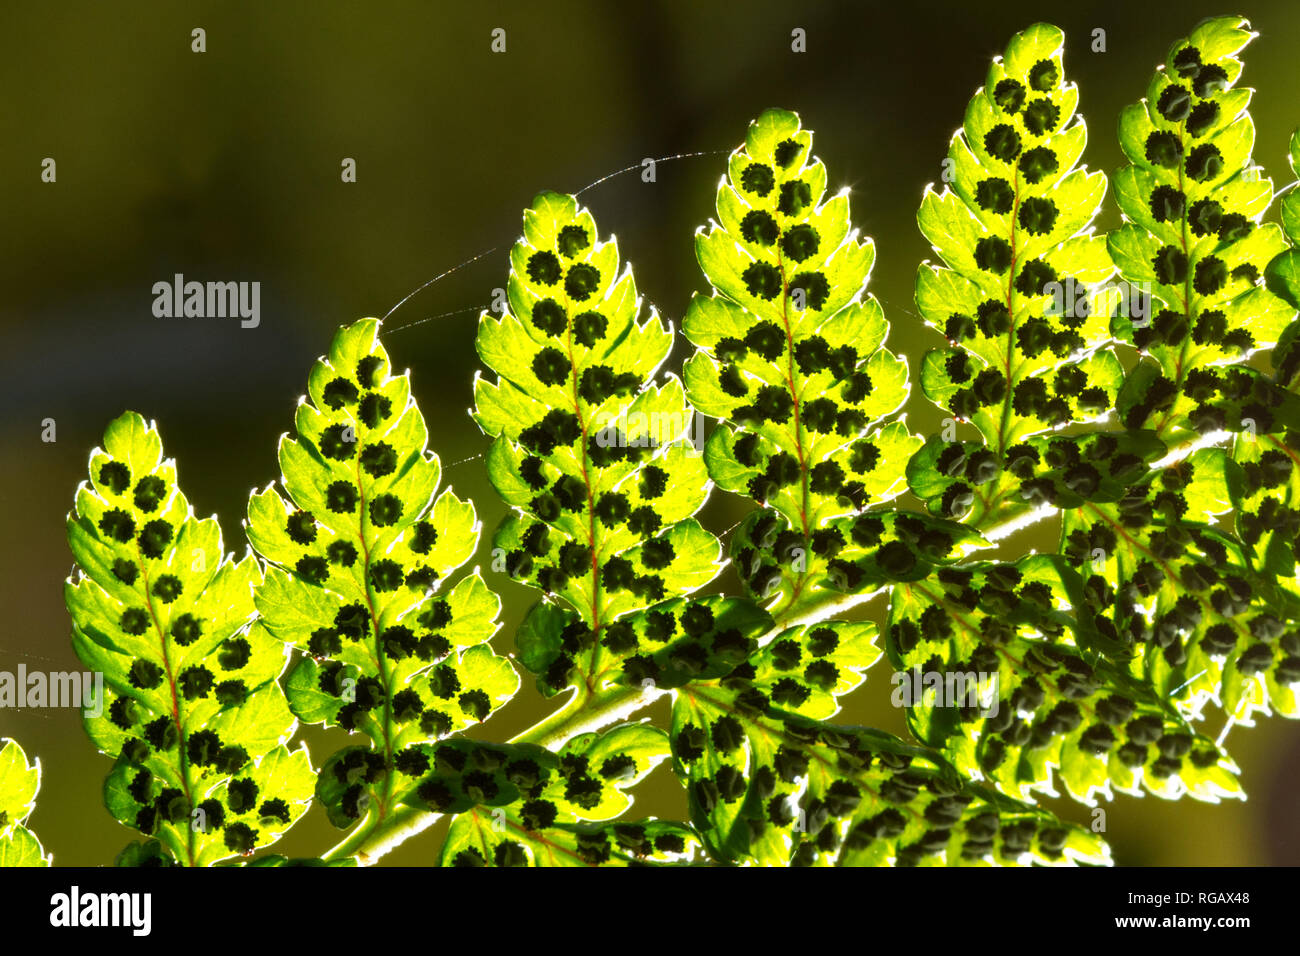 Close-up of the backlit leafs of a Fern, dark clusters of sporangia contrasting with the light green of the leaves Stock Photo